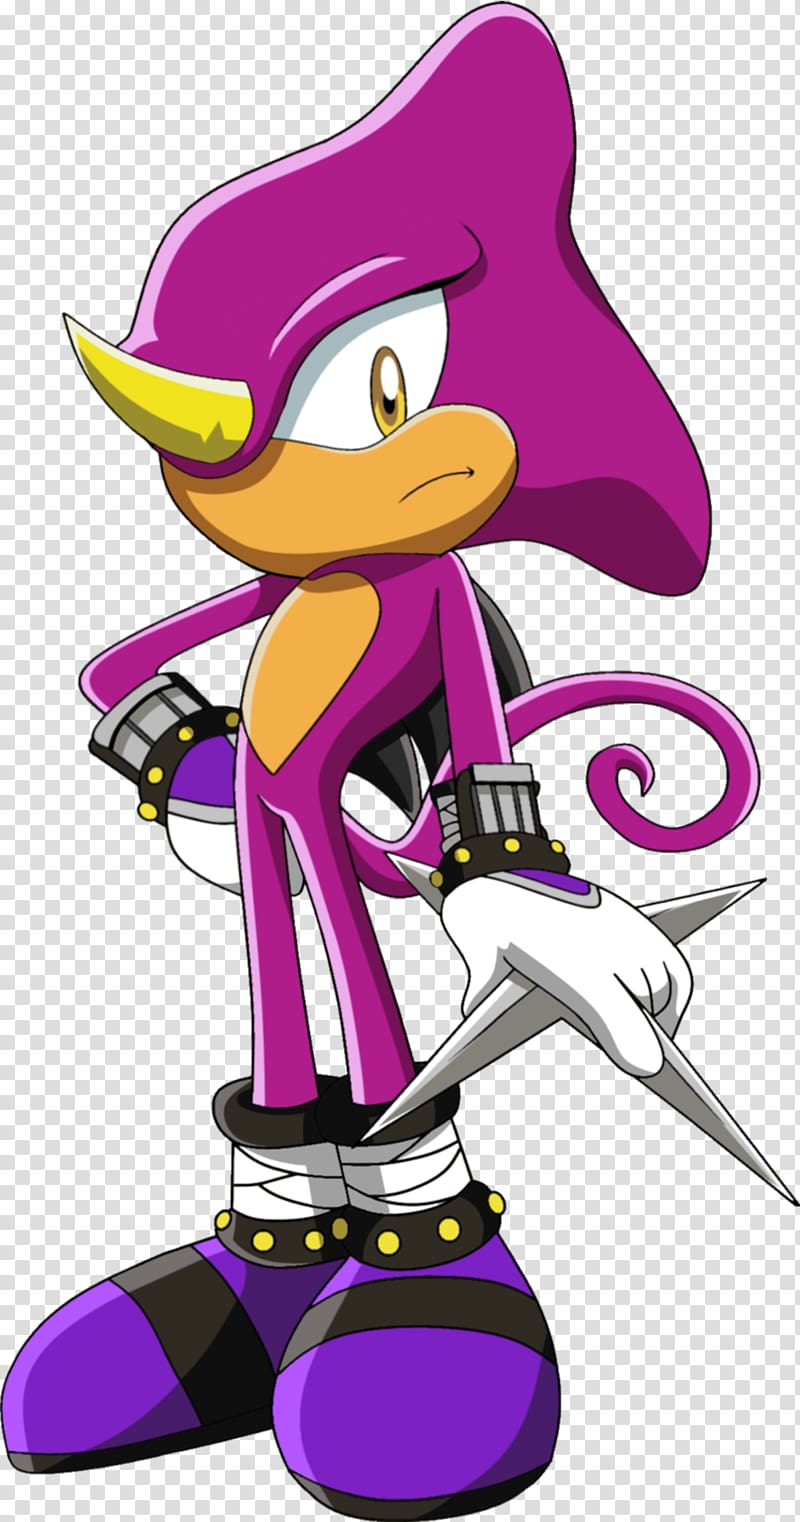 Espio the Chameleon Sonic the Hedgehog Knuckles the Echidna Shadow the Hedgehog Doctor Eggman, chameleon transparent background PNG clipart